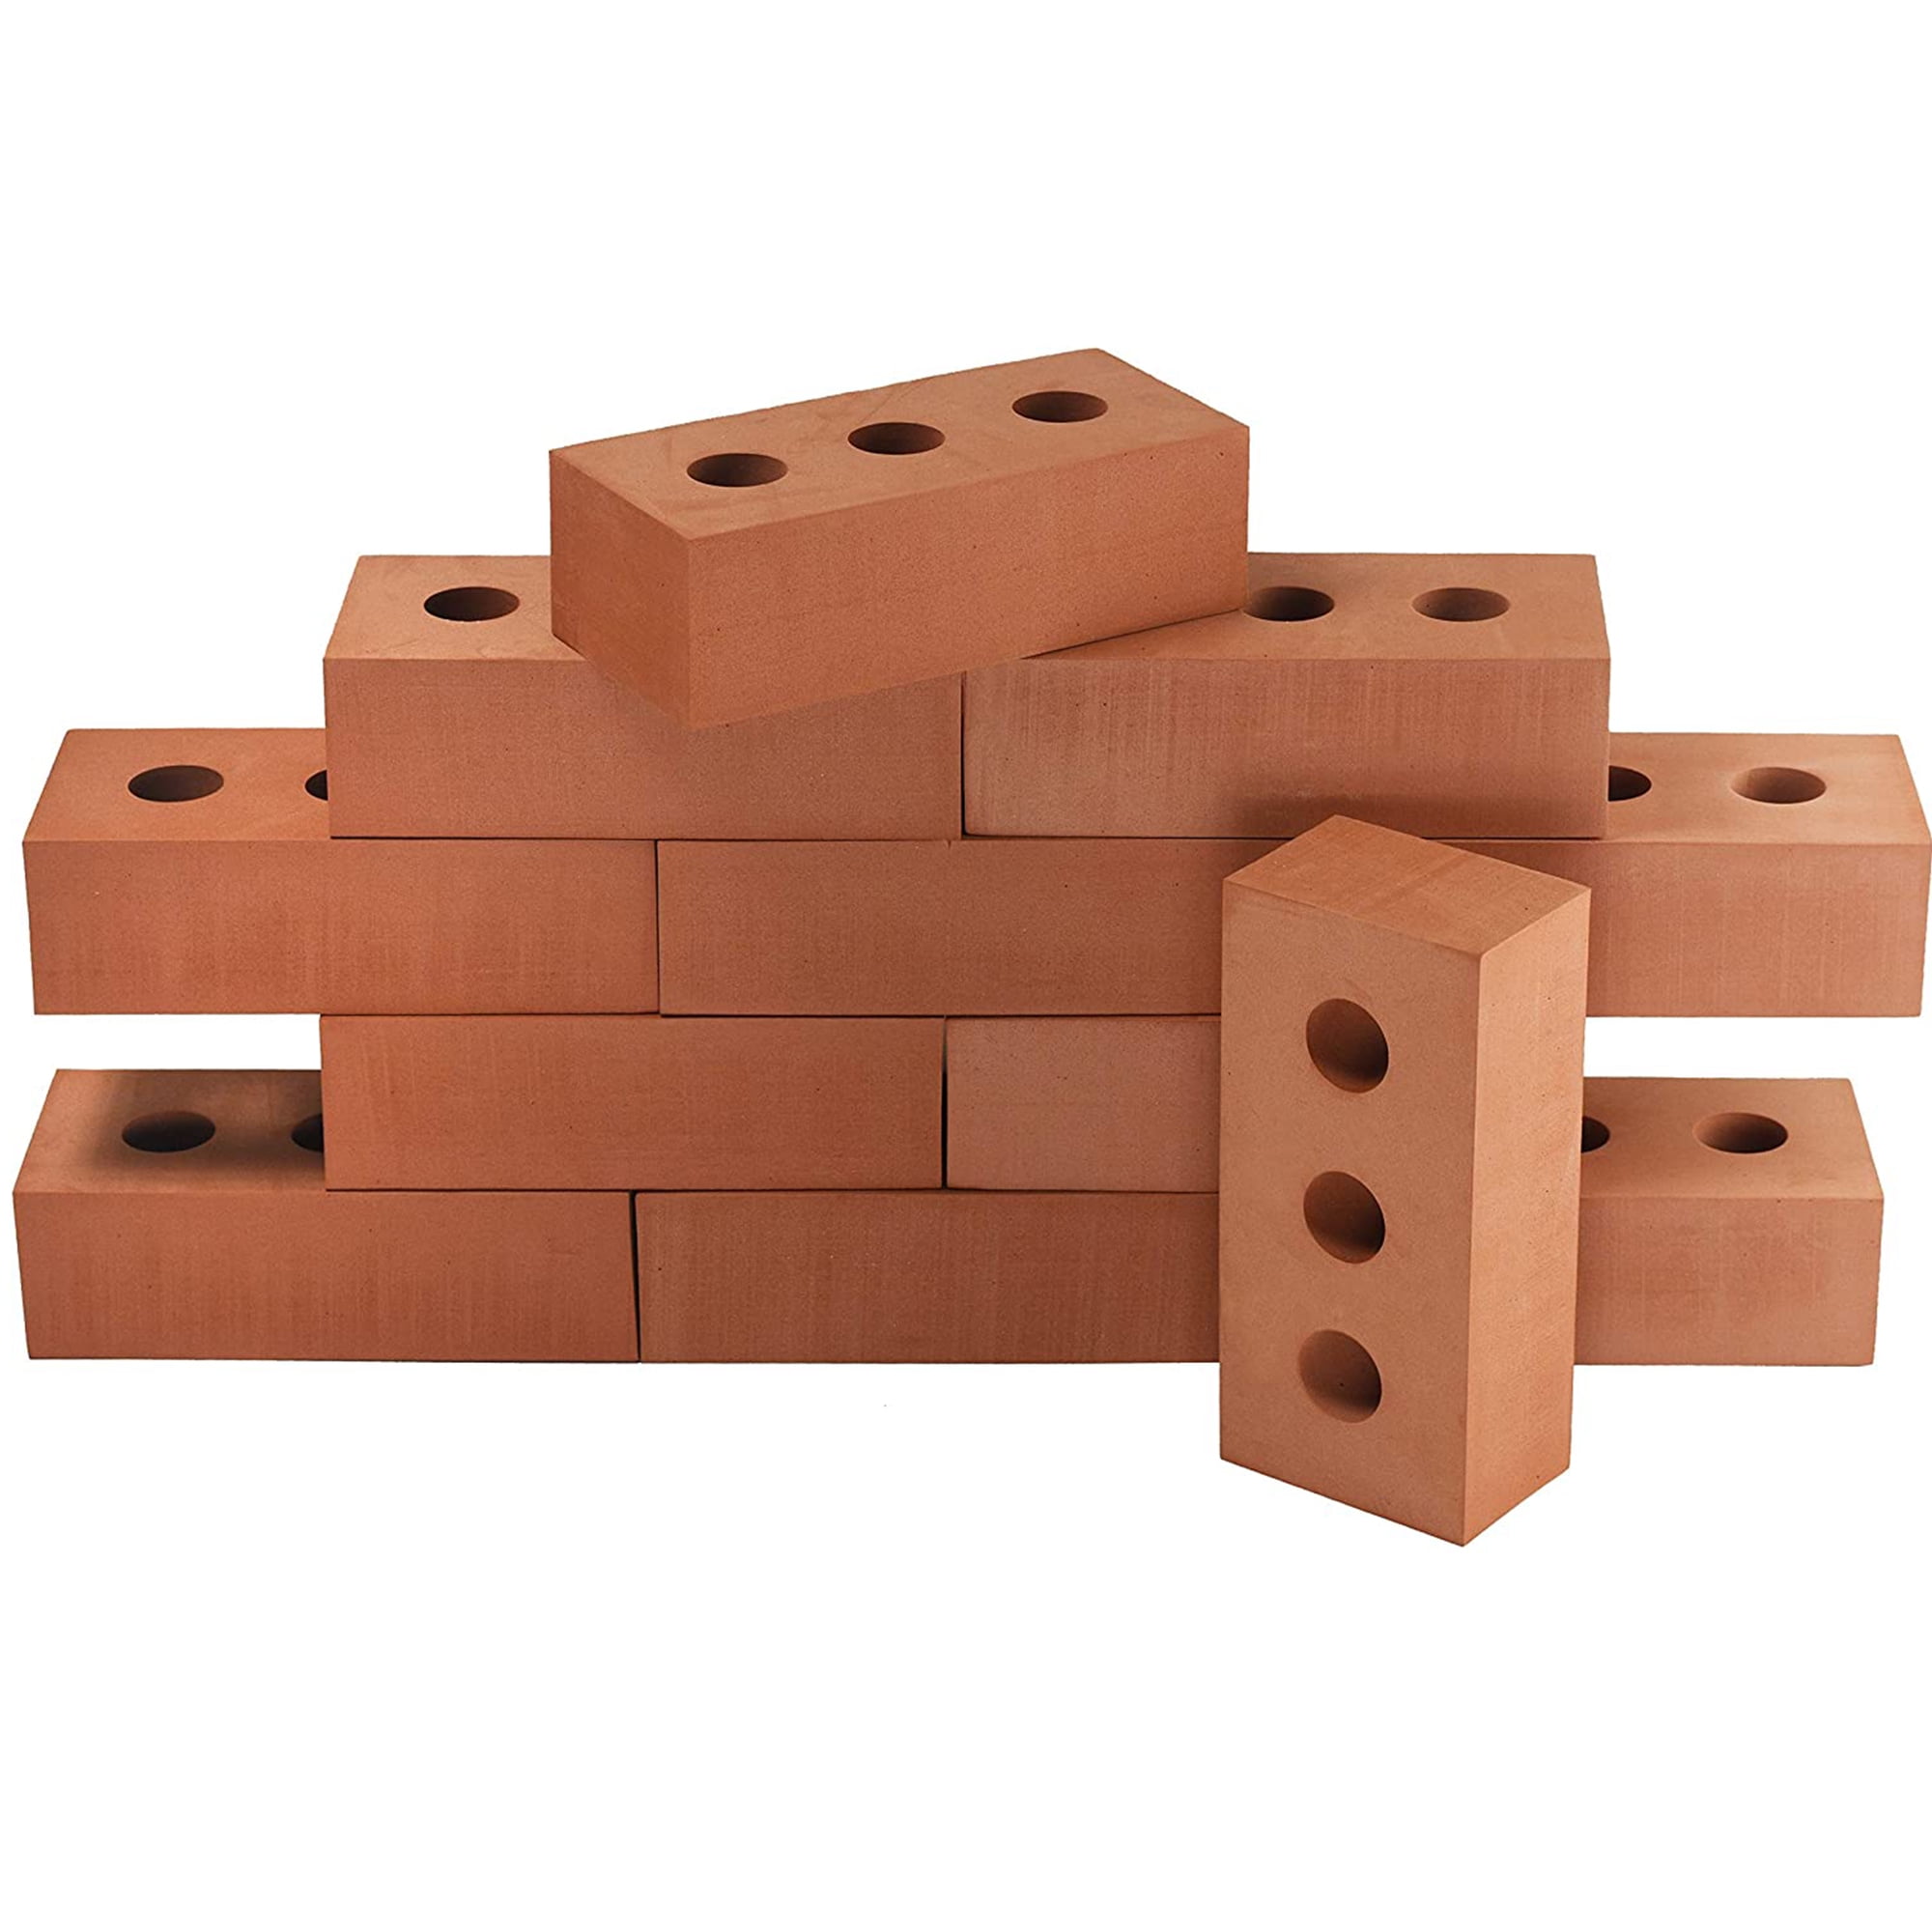 Playlearn Foam Building Blocks for Kids Construction Toy for